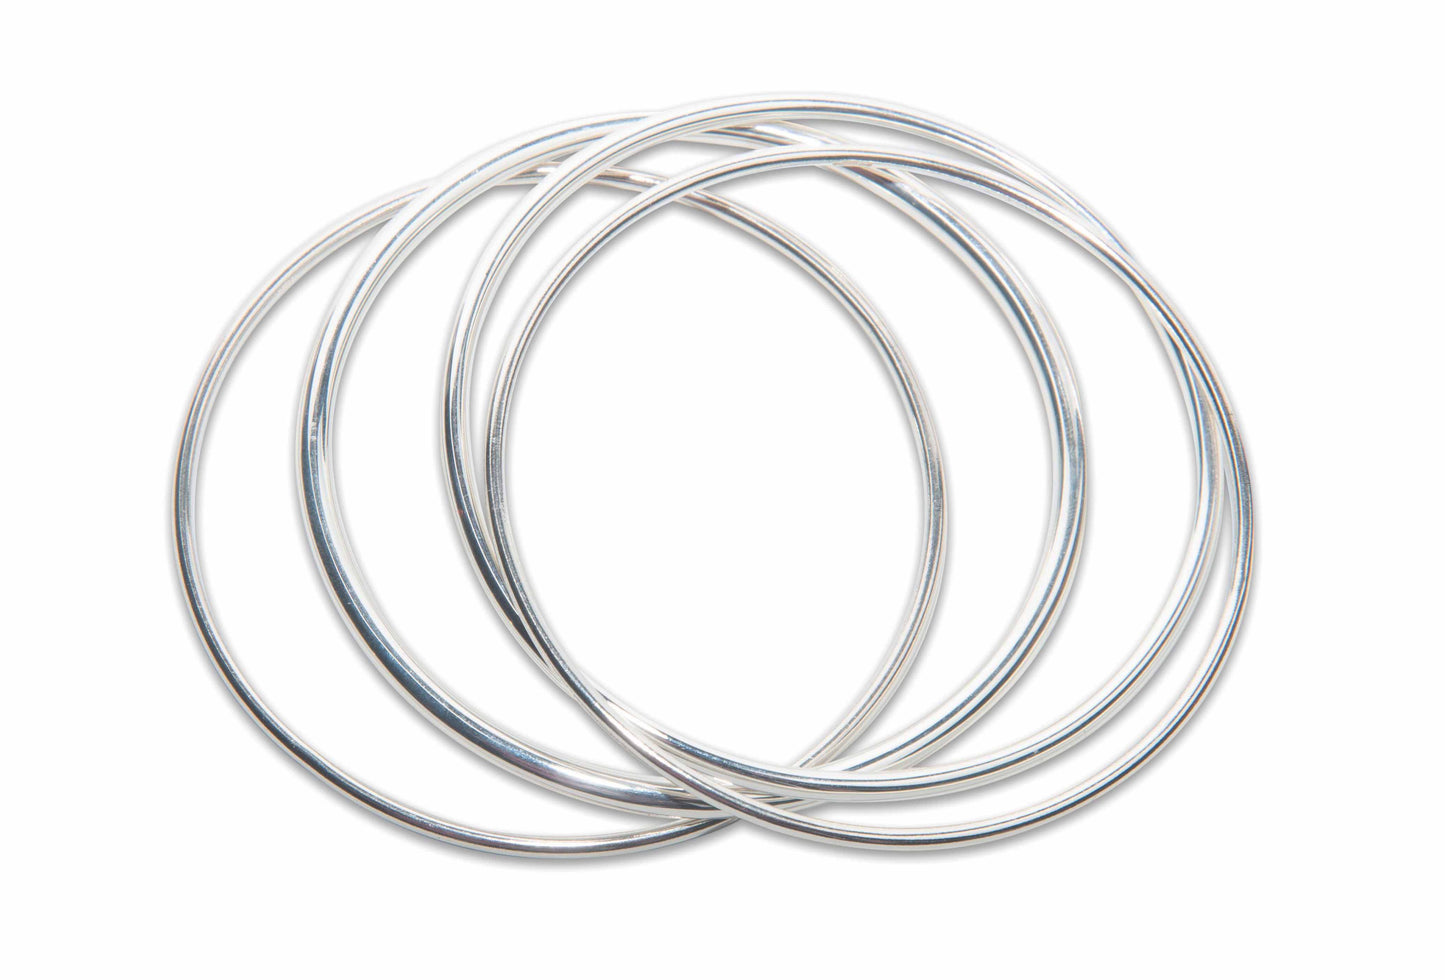 recycled silver bangles on white background